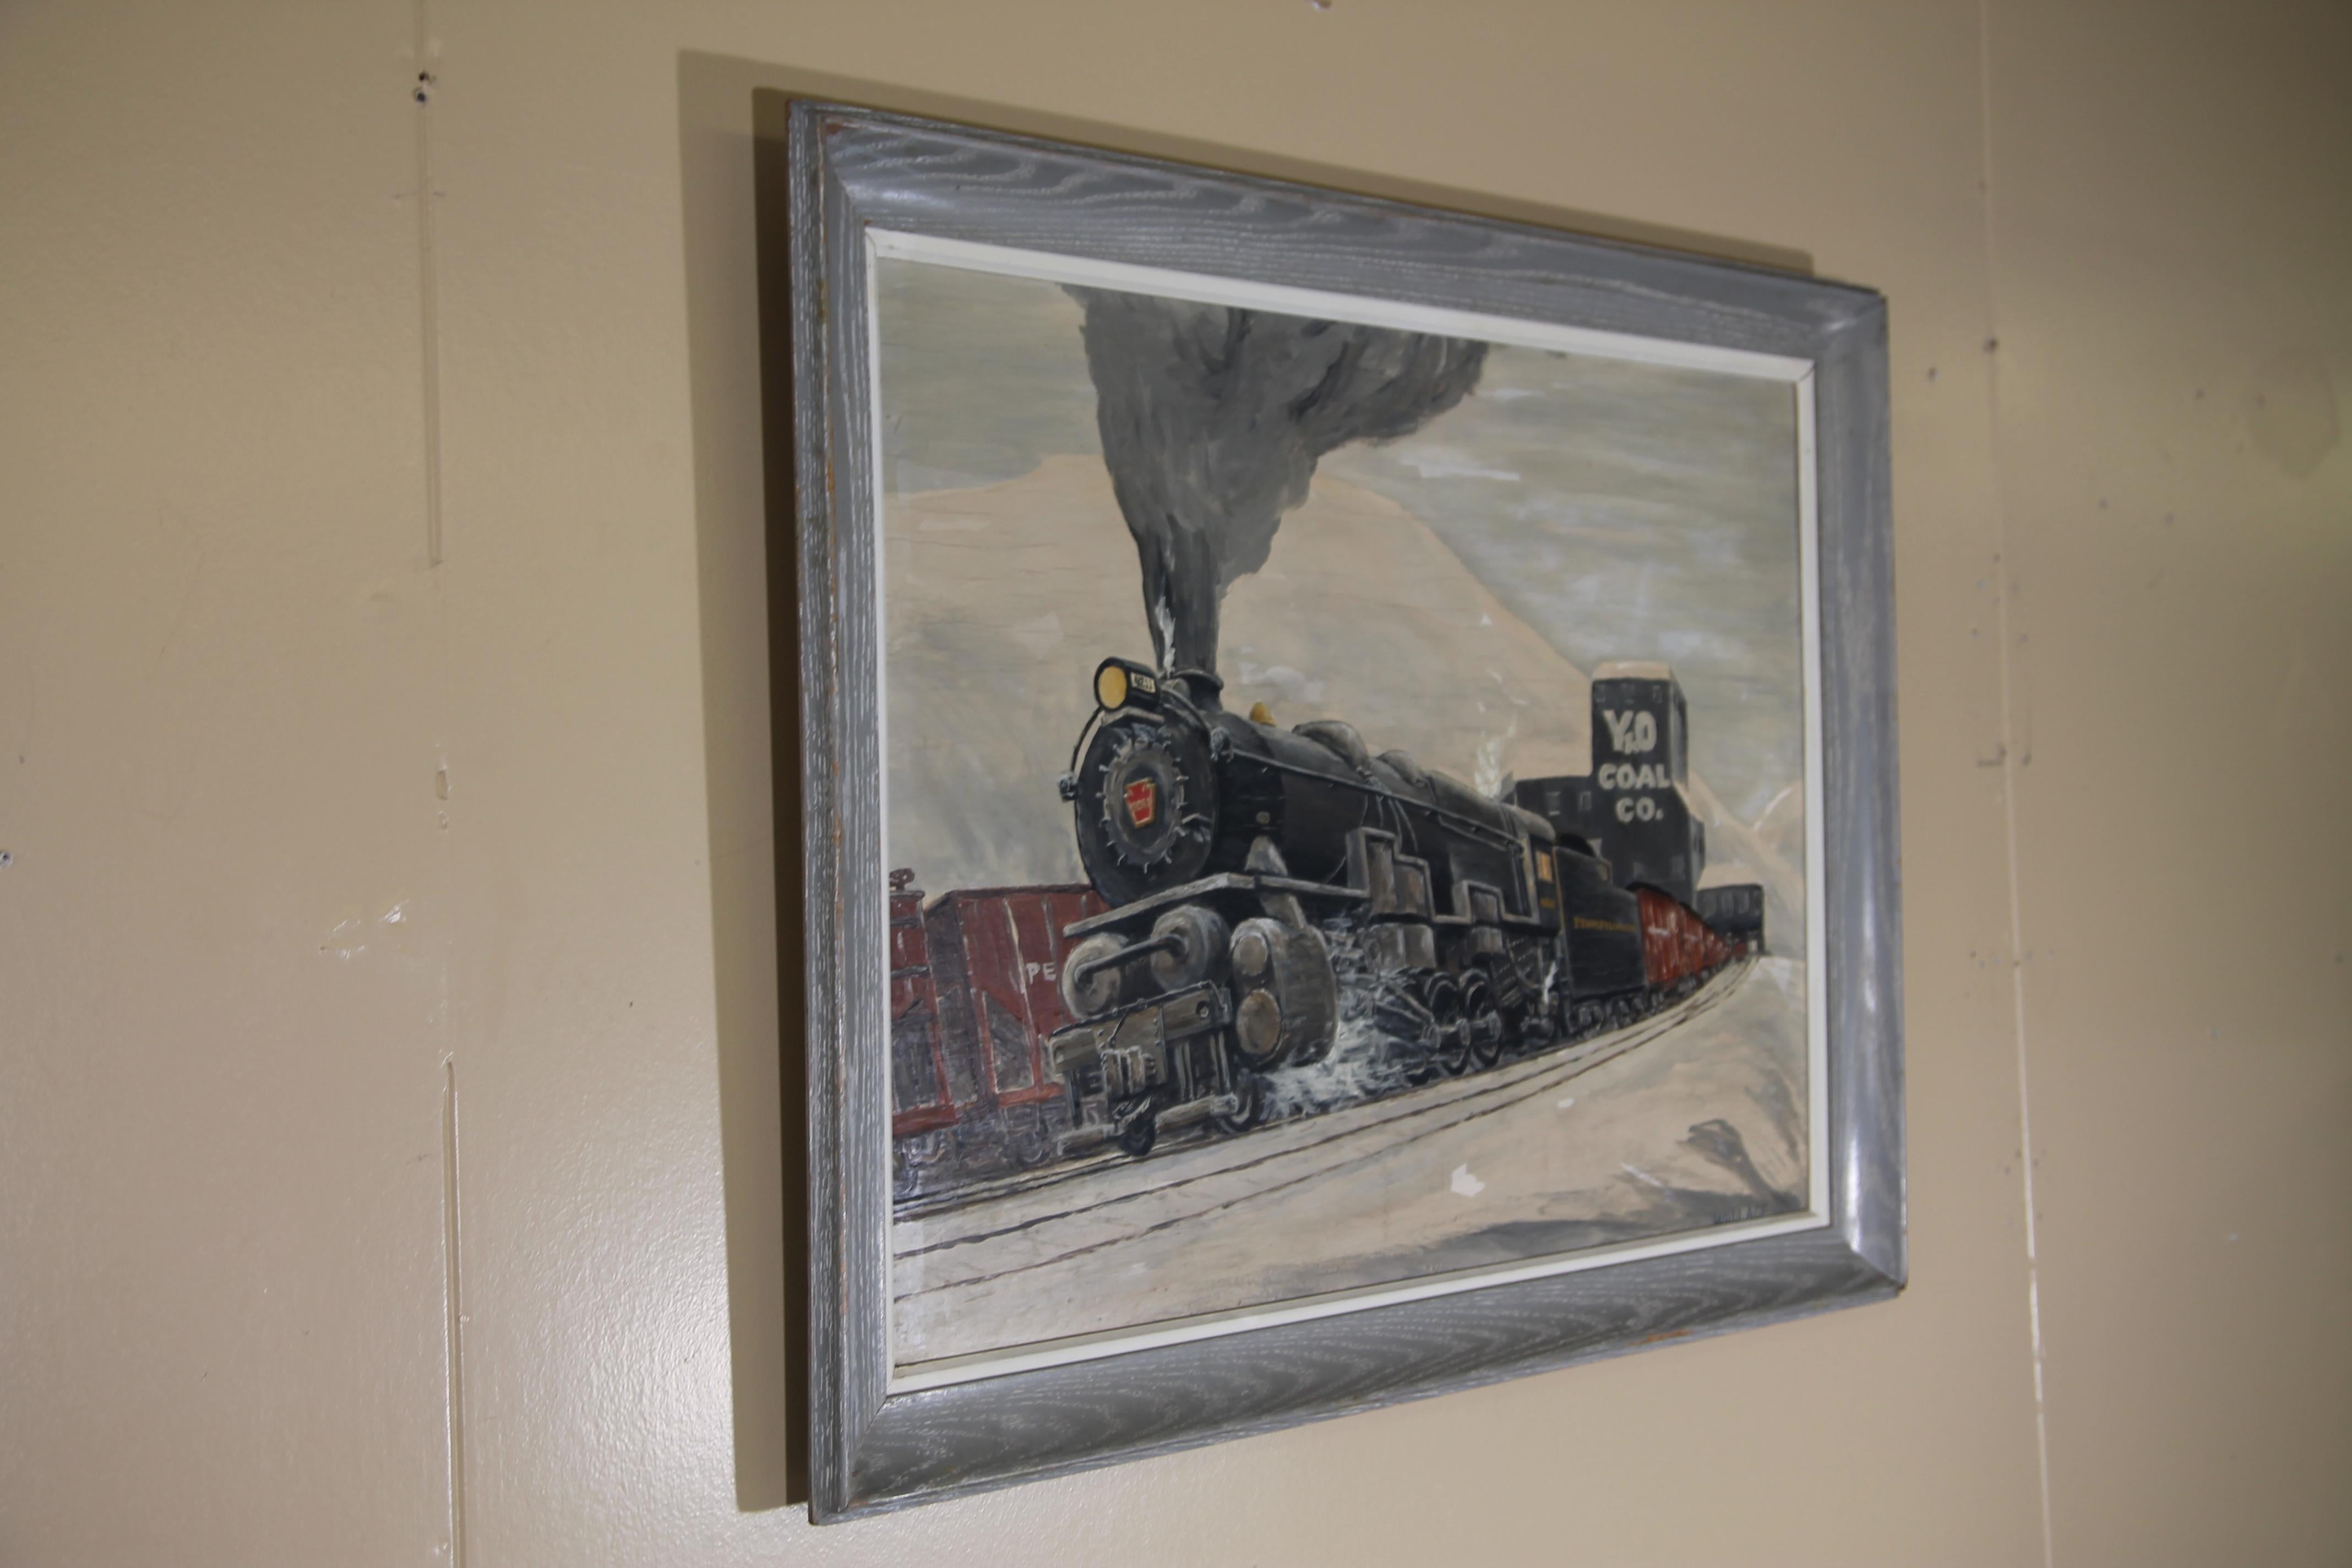 Wonderful train painting with original frame. We are guessing at the 1940s for this painting signed by the artist, WALLACE.